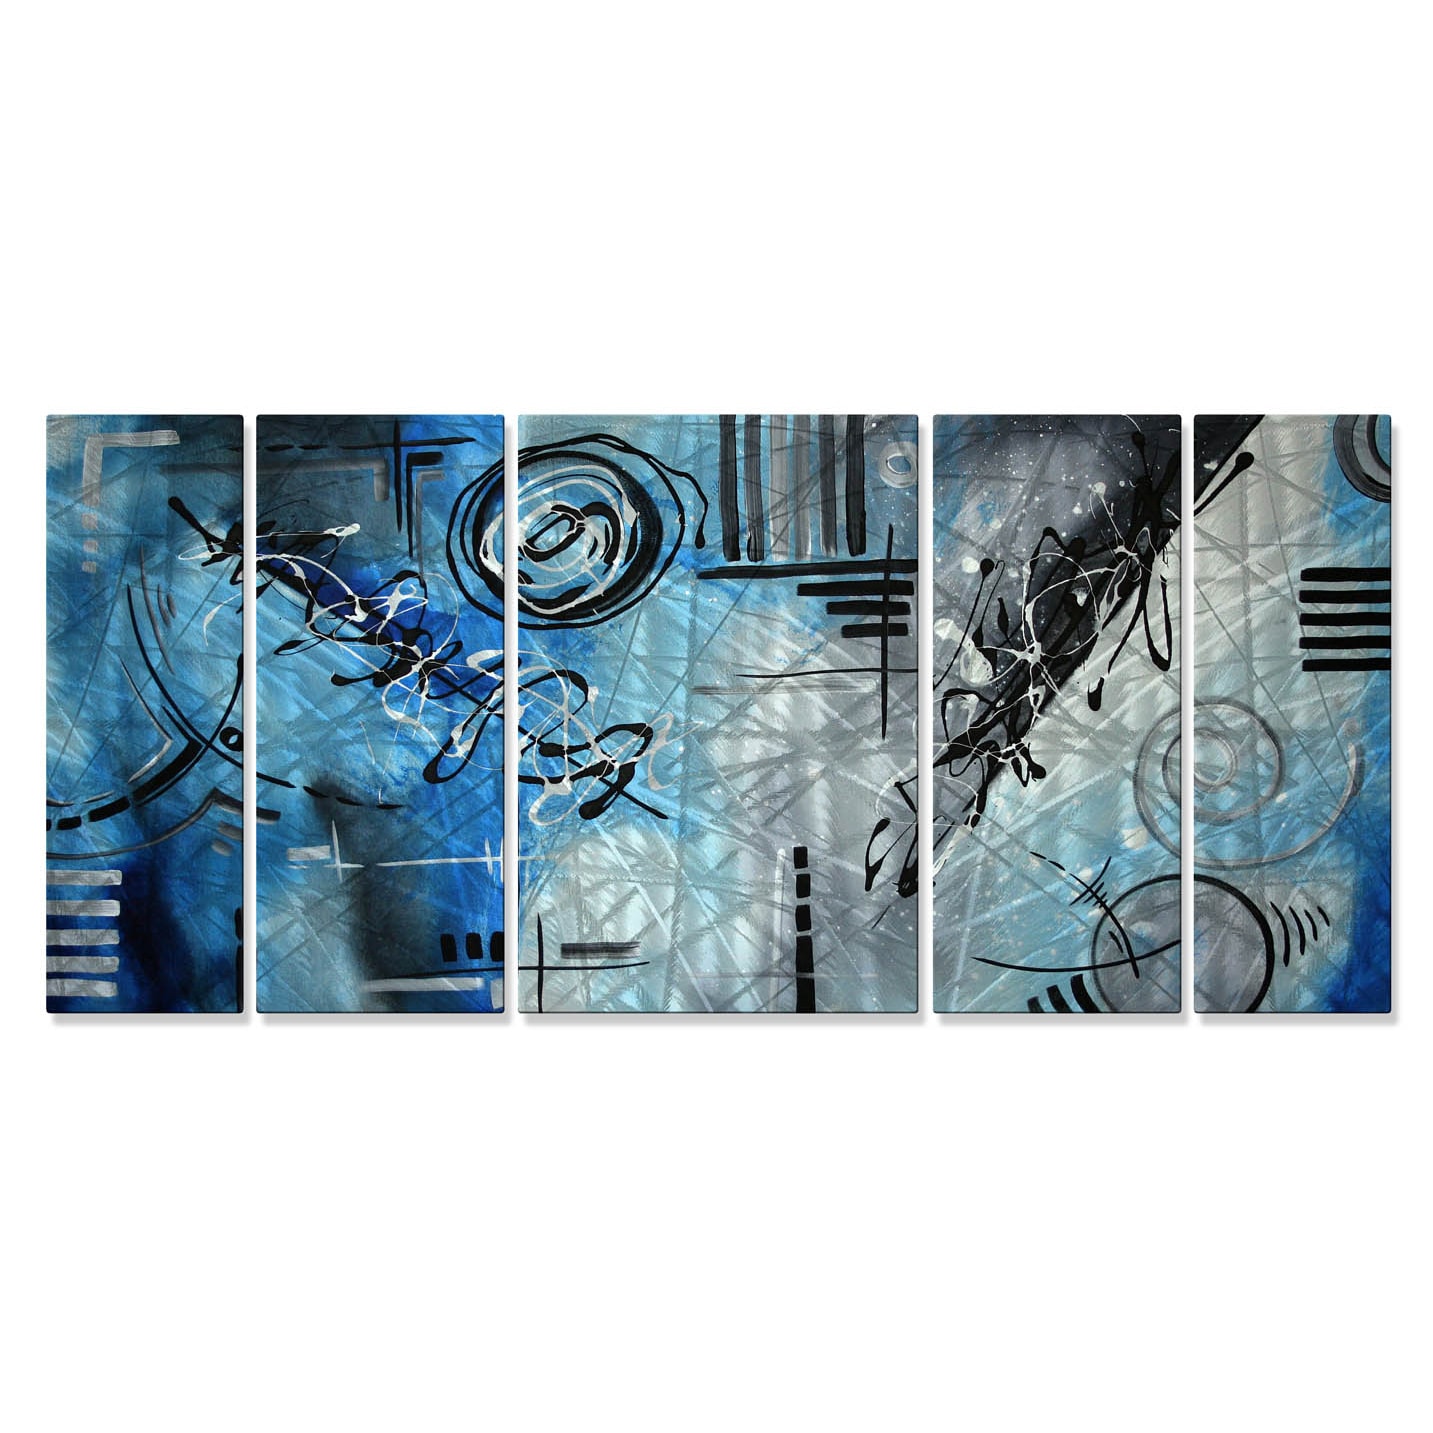 Megan Duncanson Blue Divinity Metal Wall Art (LargeSubject AbstractMedium MetalImage dimensions 24 inches high x 56 inches wide x 1 inch deepOuter dimensions 24 inches high x 56 inches wide x 1 inch deep )